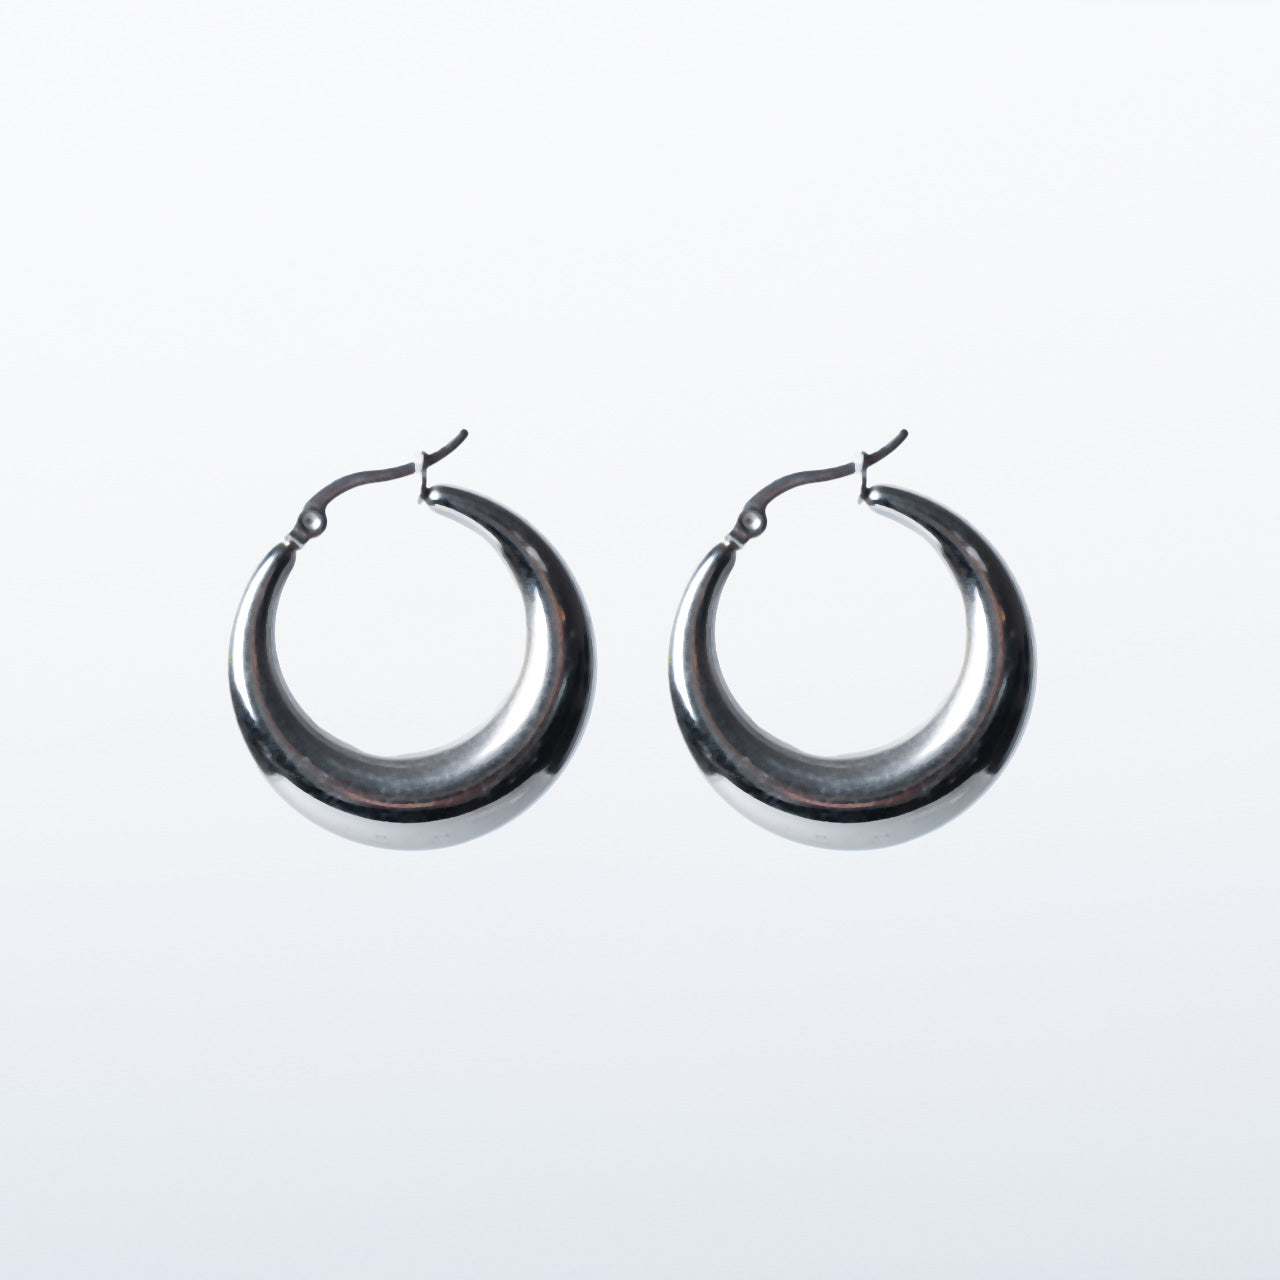 Snash - Earrings "Creoles small" silver